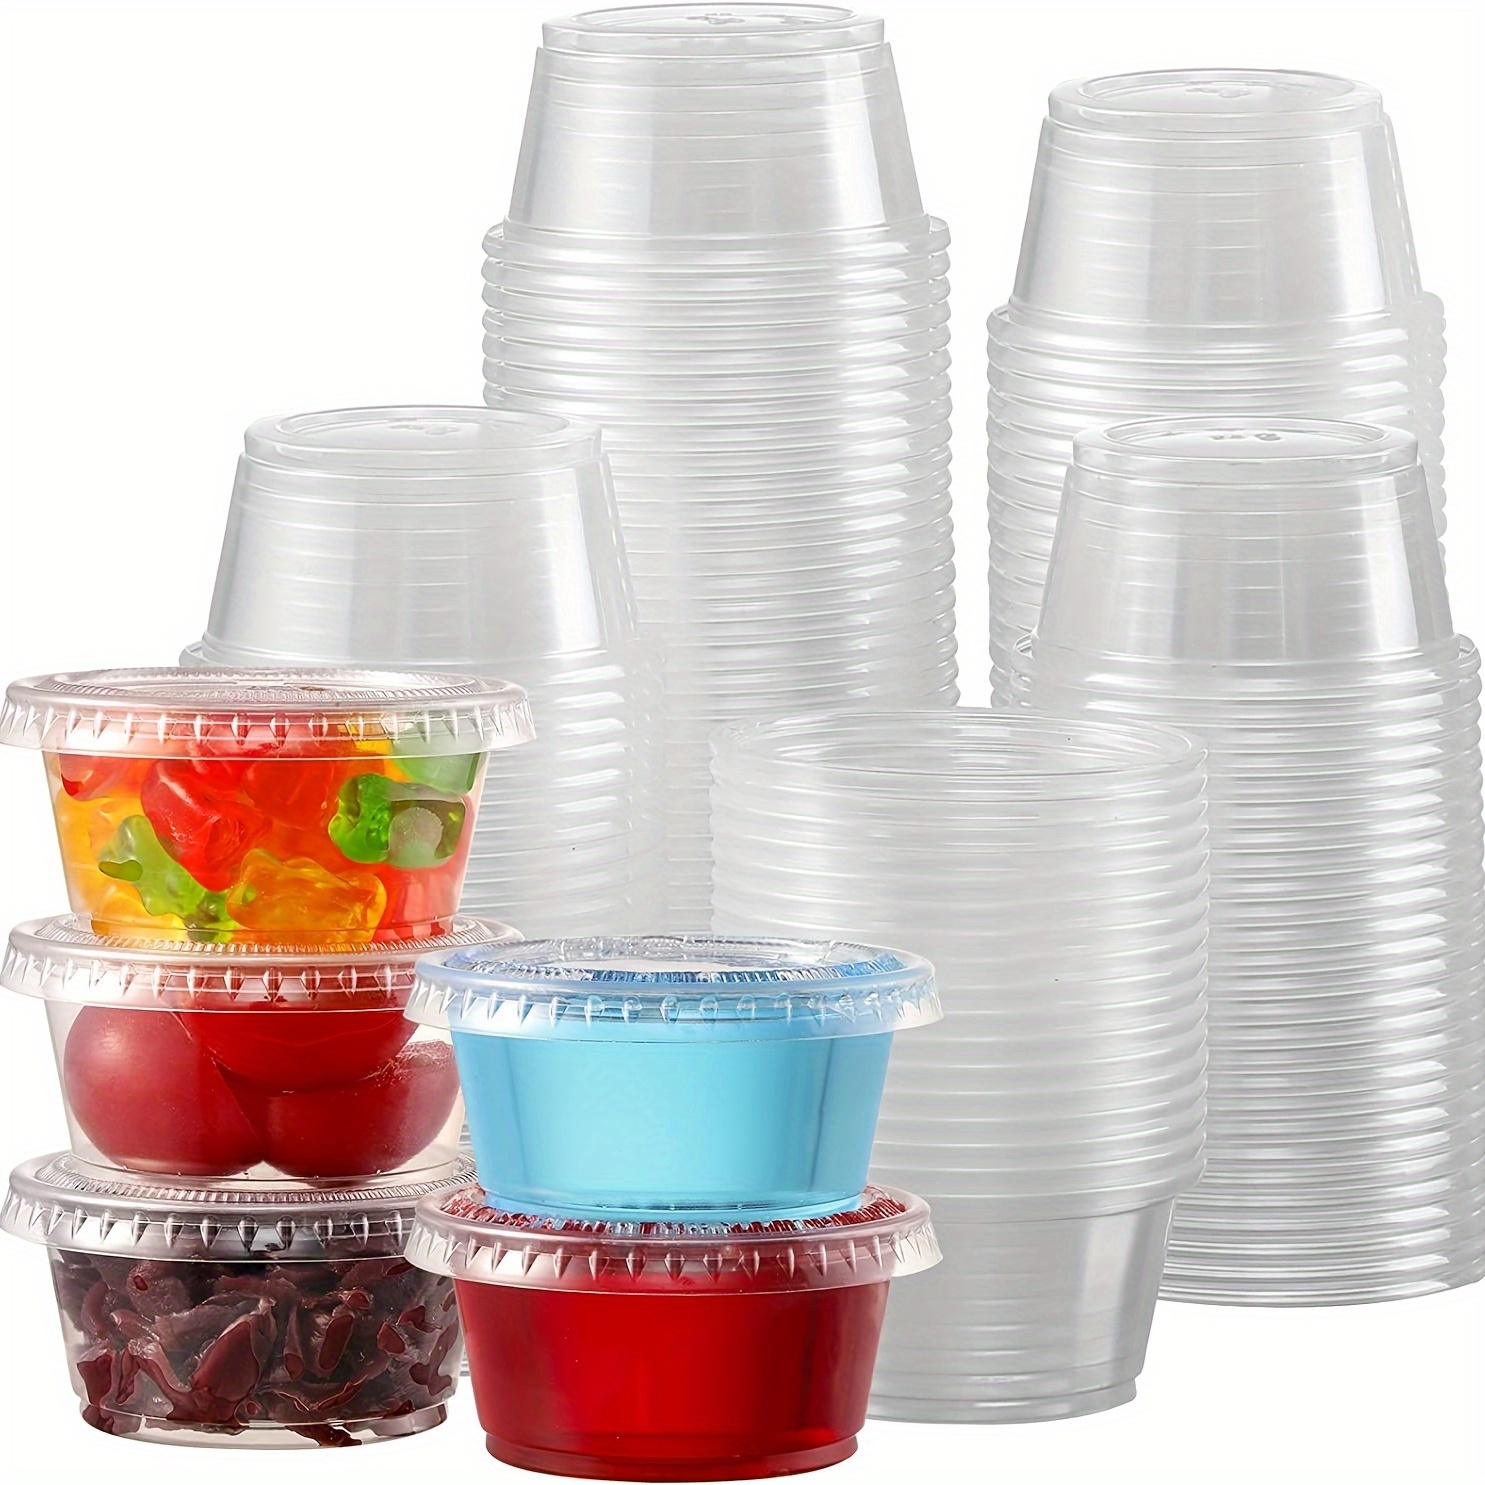 100 Sets 3.4 oz Disposable Plastic Portion Cups with Lids, Snack Cups,  100ml clear